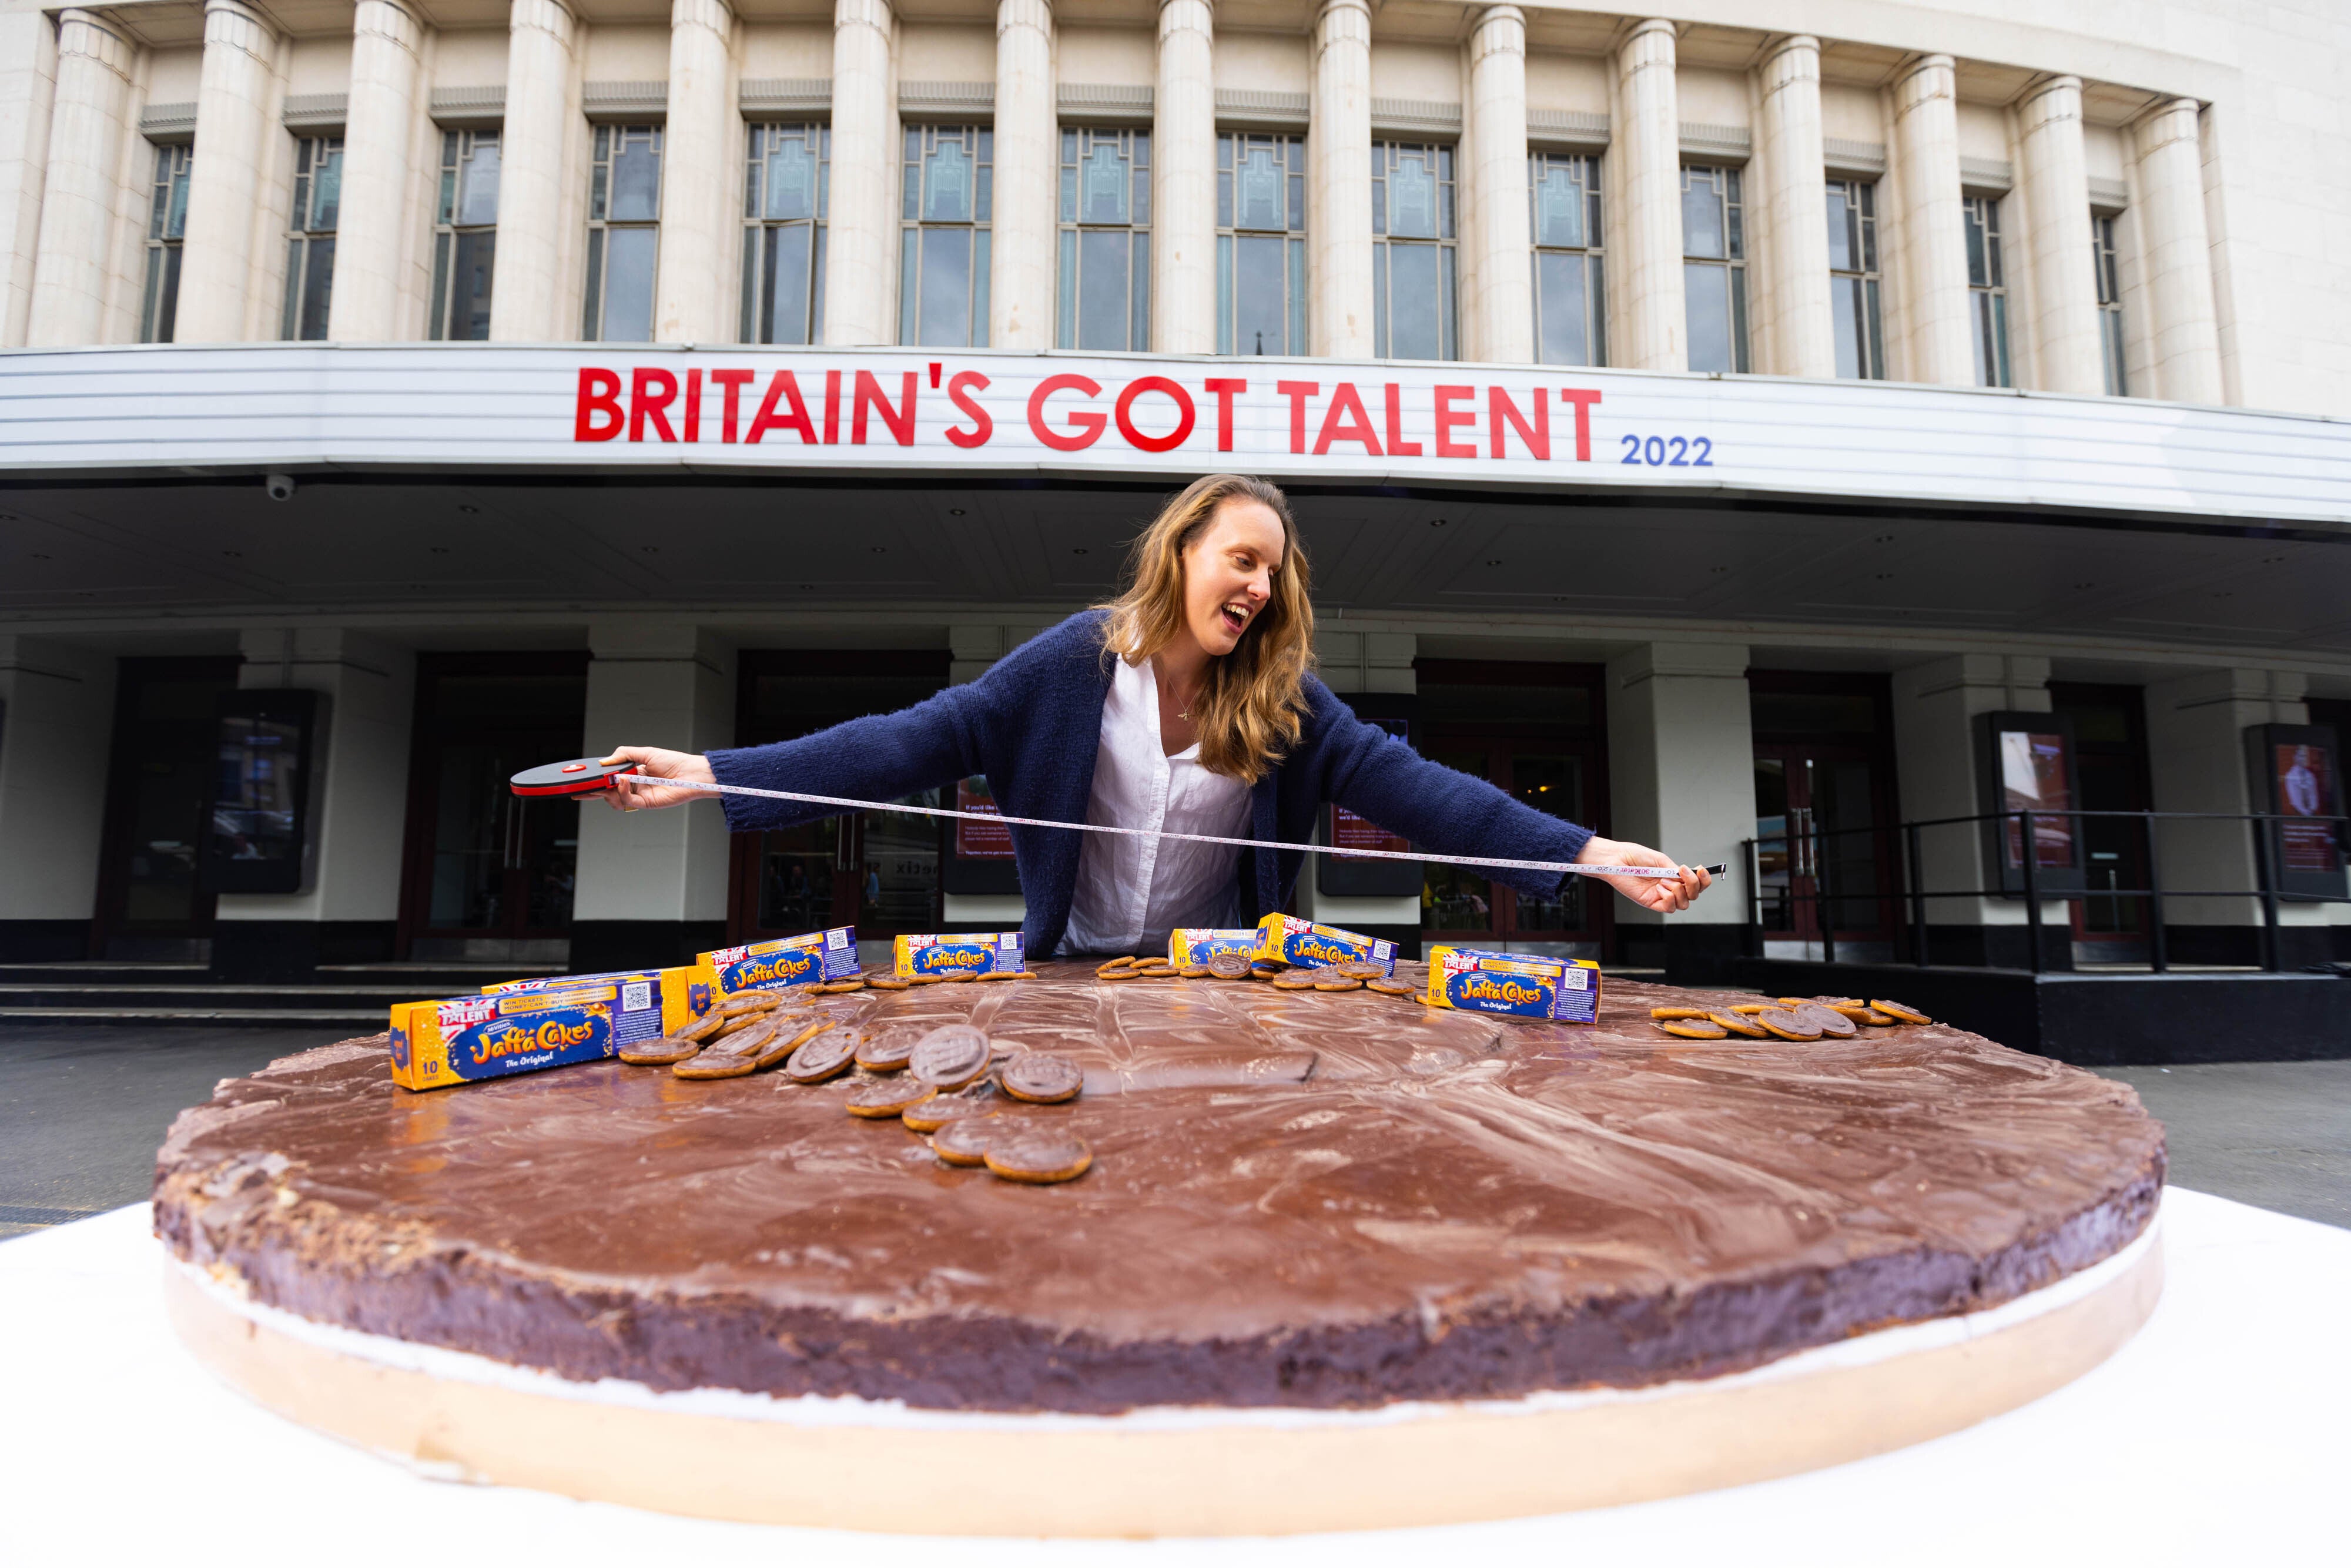 McVitie's launches The Big One Jaffa Cake two decades on from beating  taxman in landmark VAT battle | Daily Mail Online